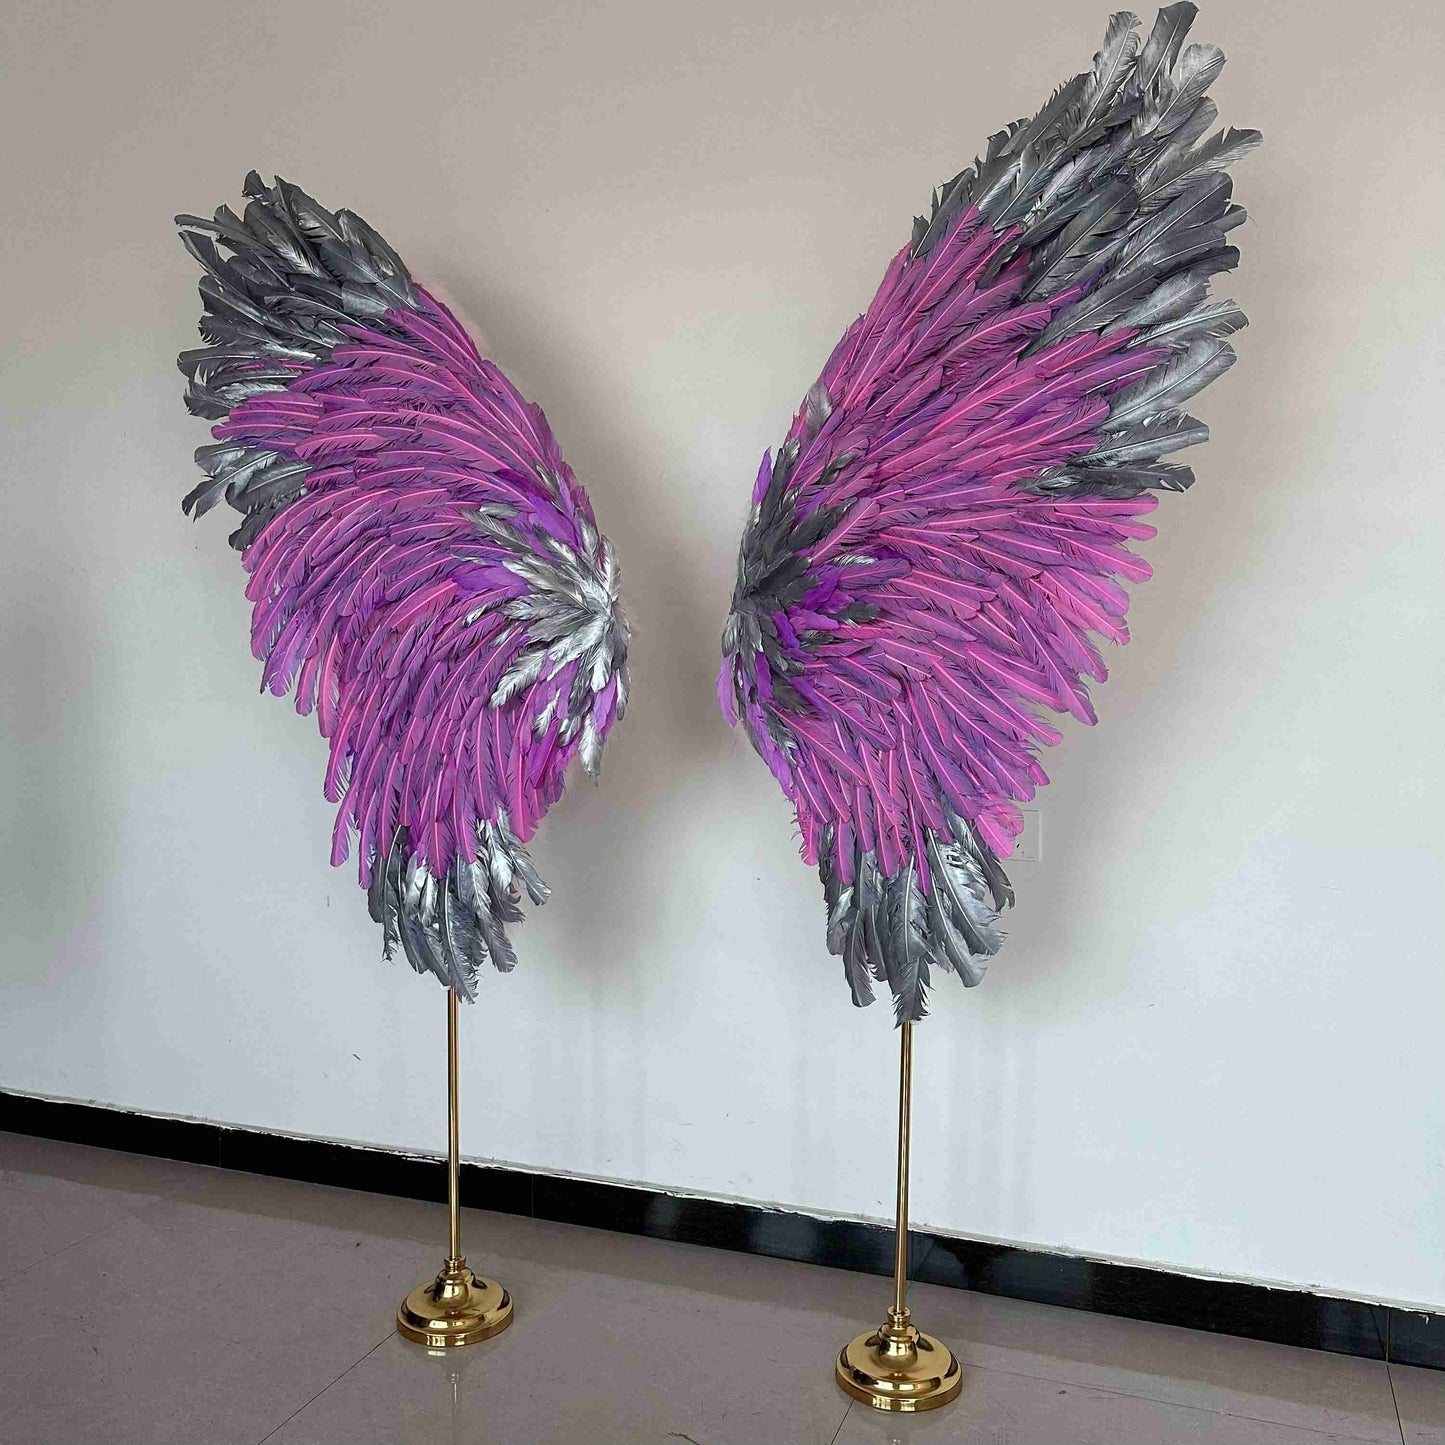 Our silver pink angel wings on poles from the left side. Made from goose feathers. Wings for decoration. Suitable for restaurant, cafe, night club, event decorations.